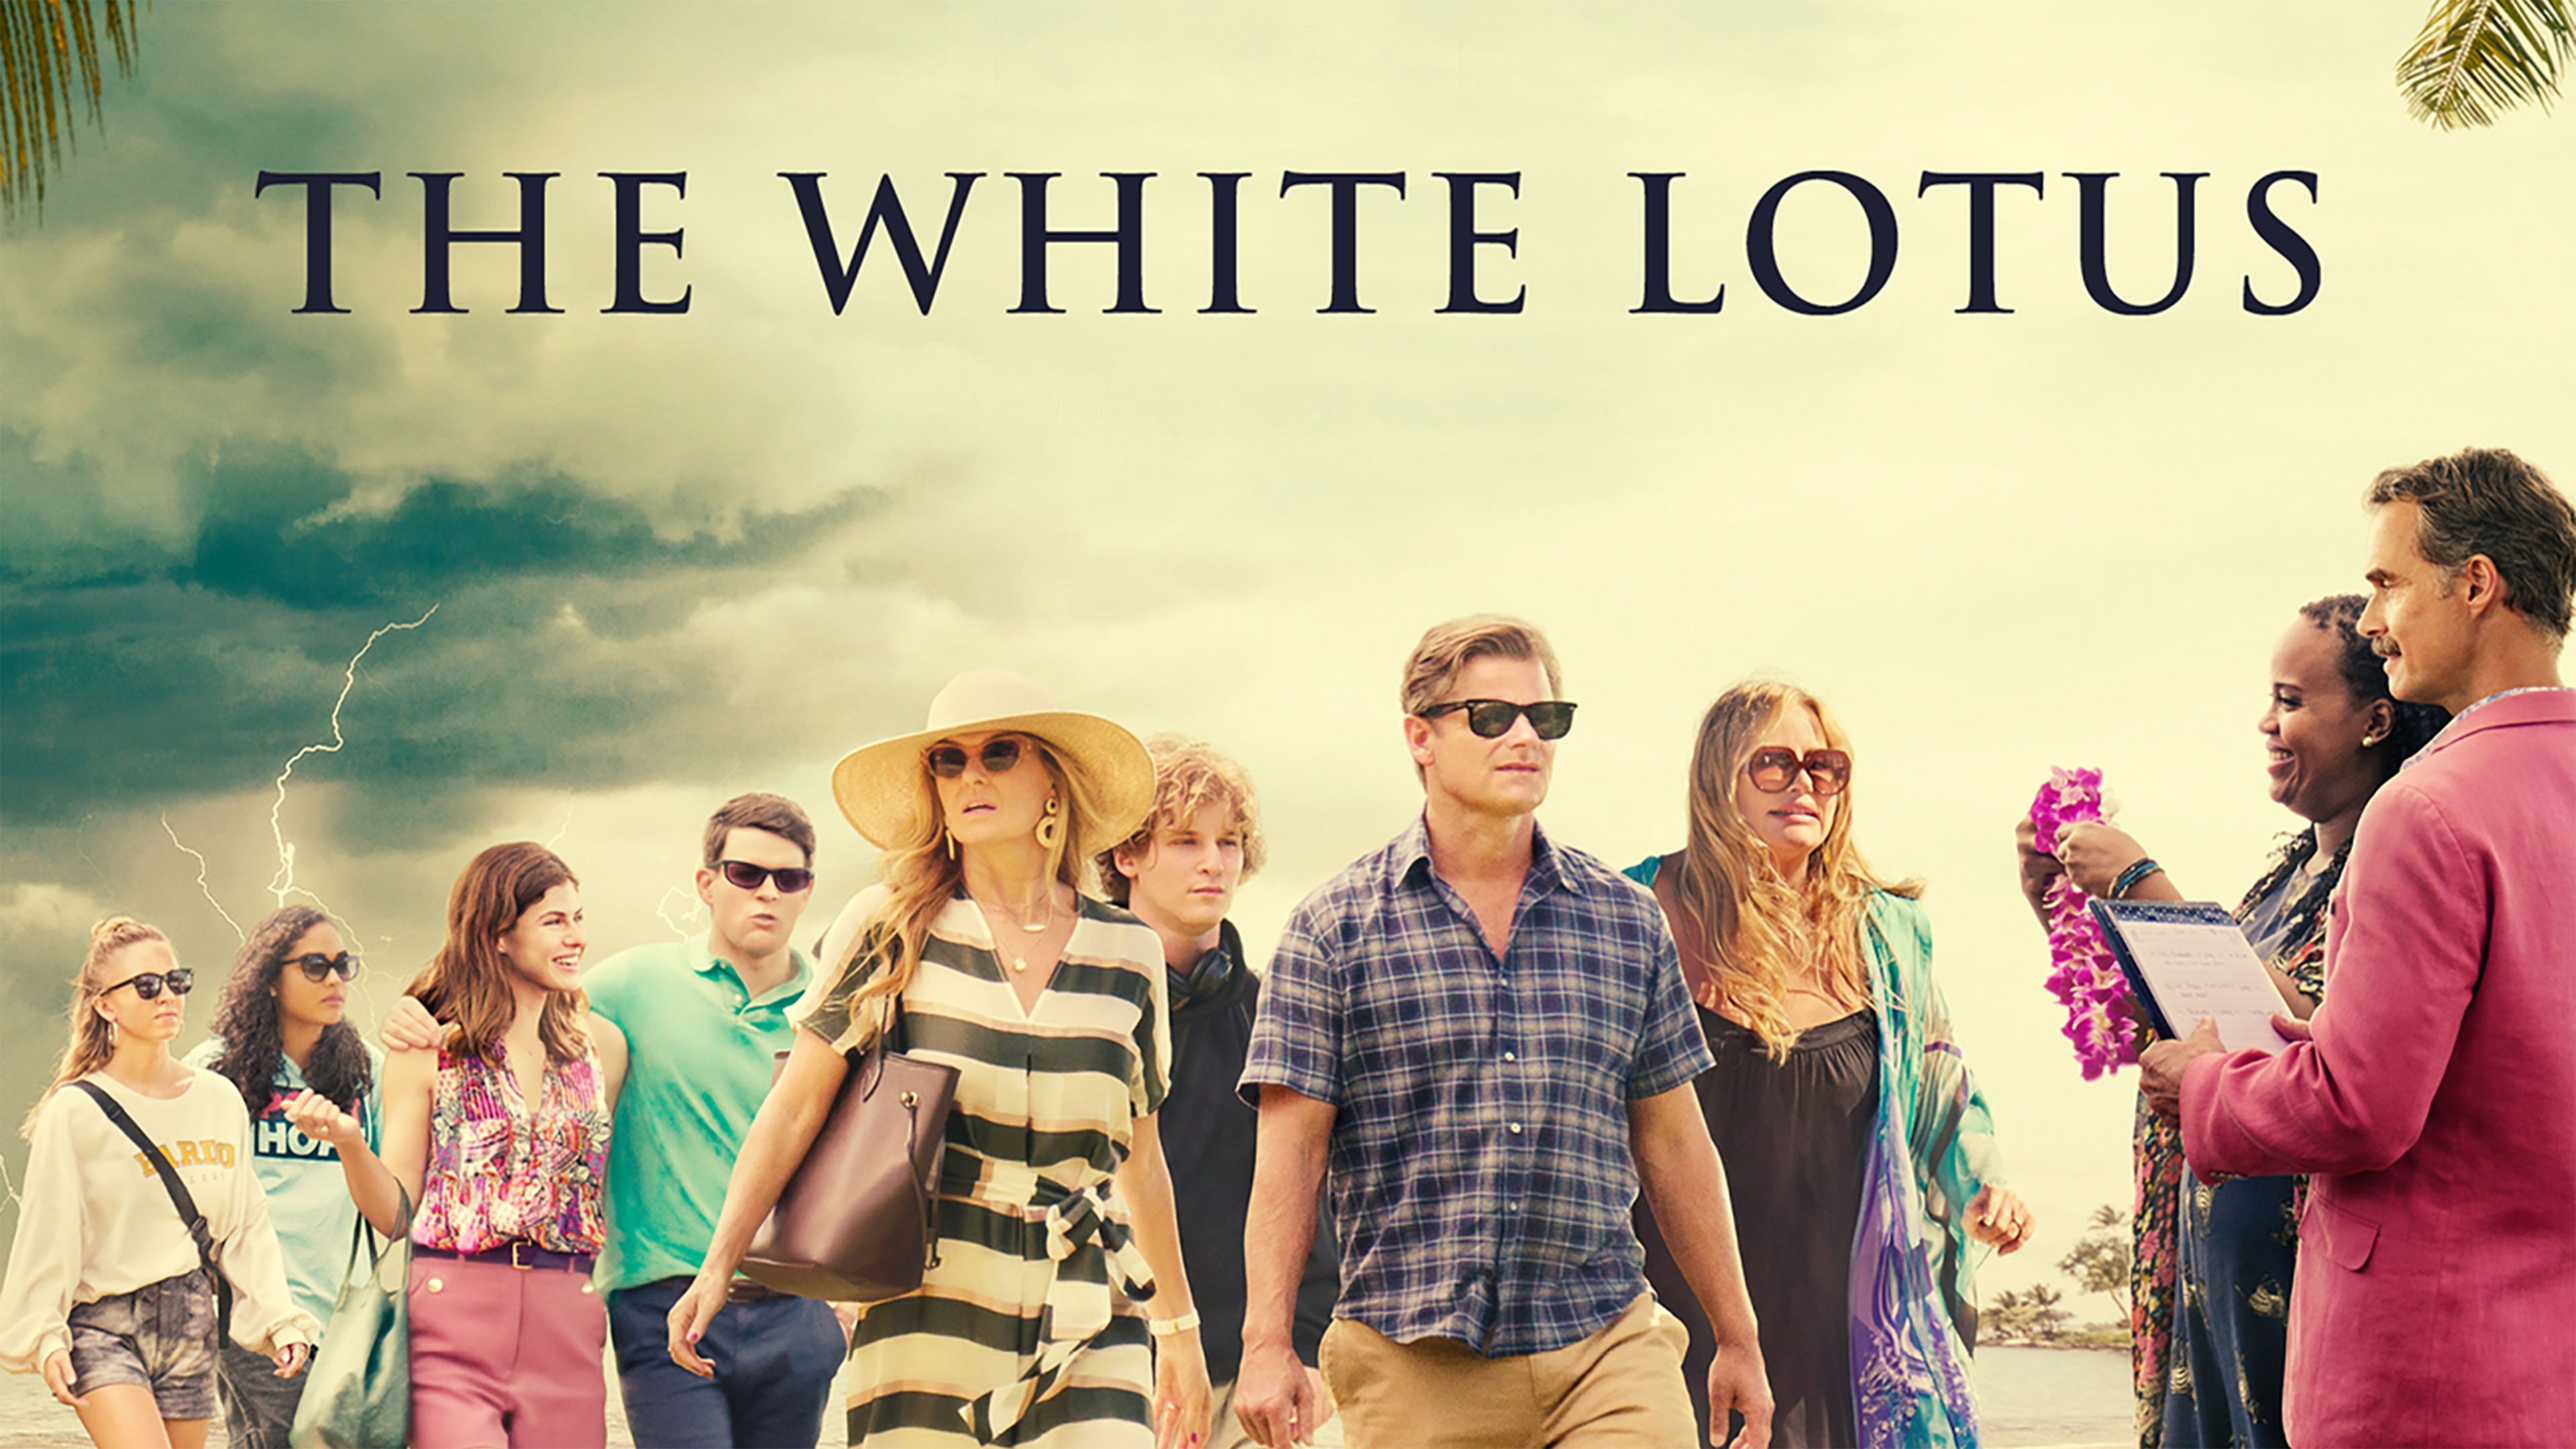 The White Lotus TV series, written by Mike White.